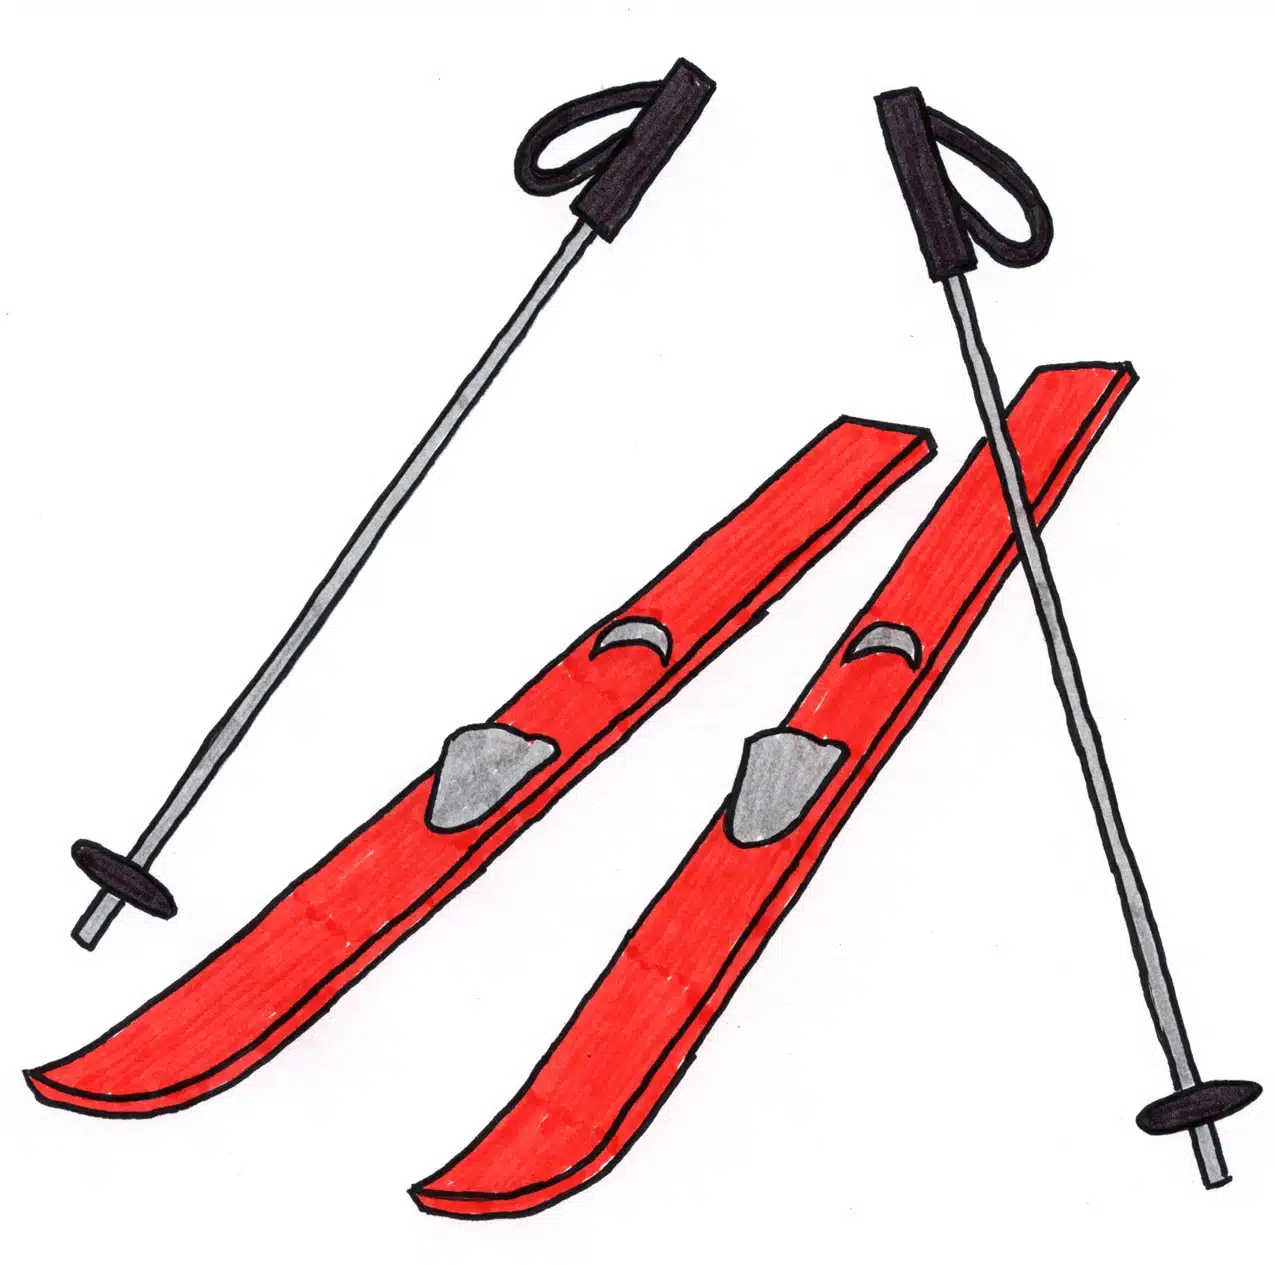 Easy How to Draw Skis Tutorial and Skis Coloring Page